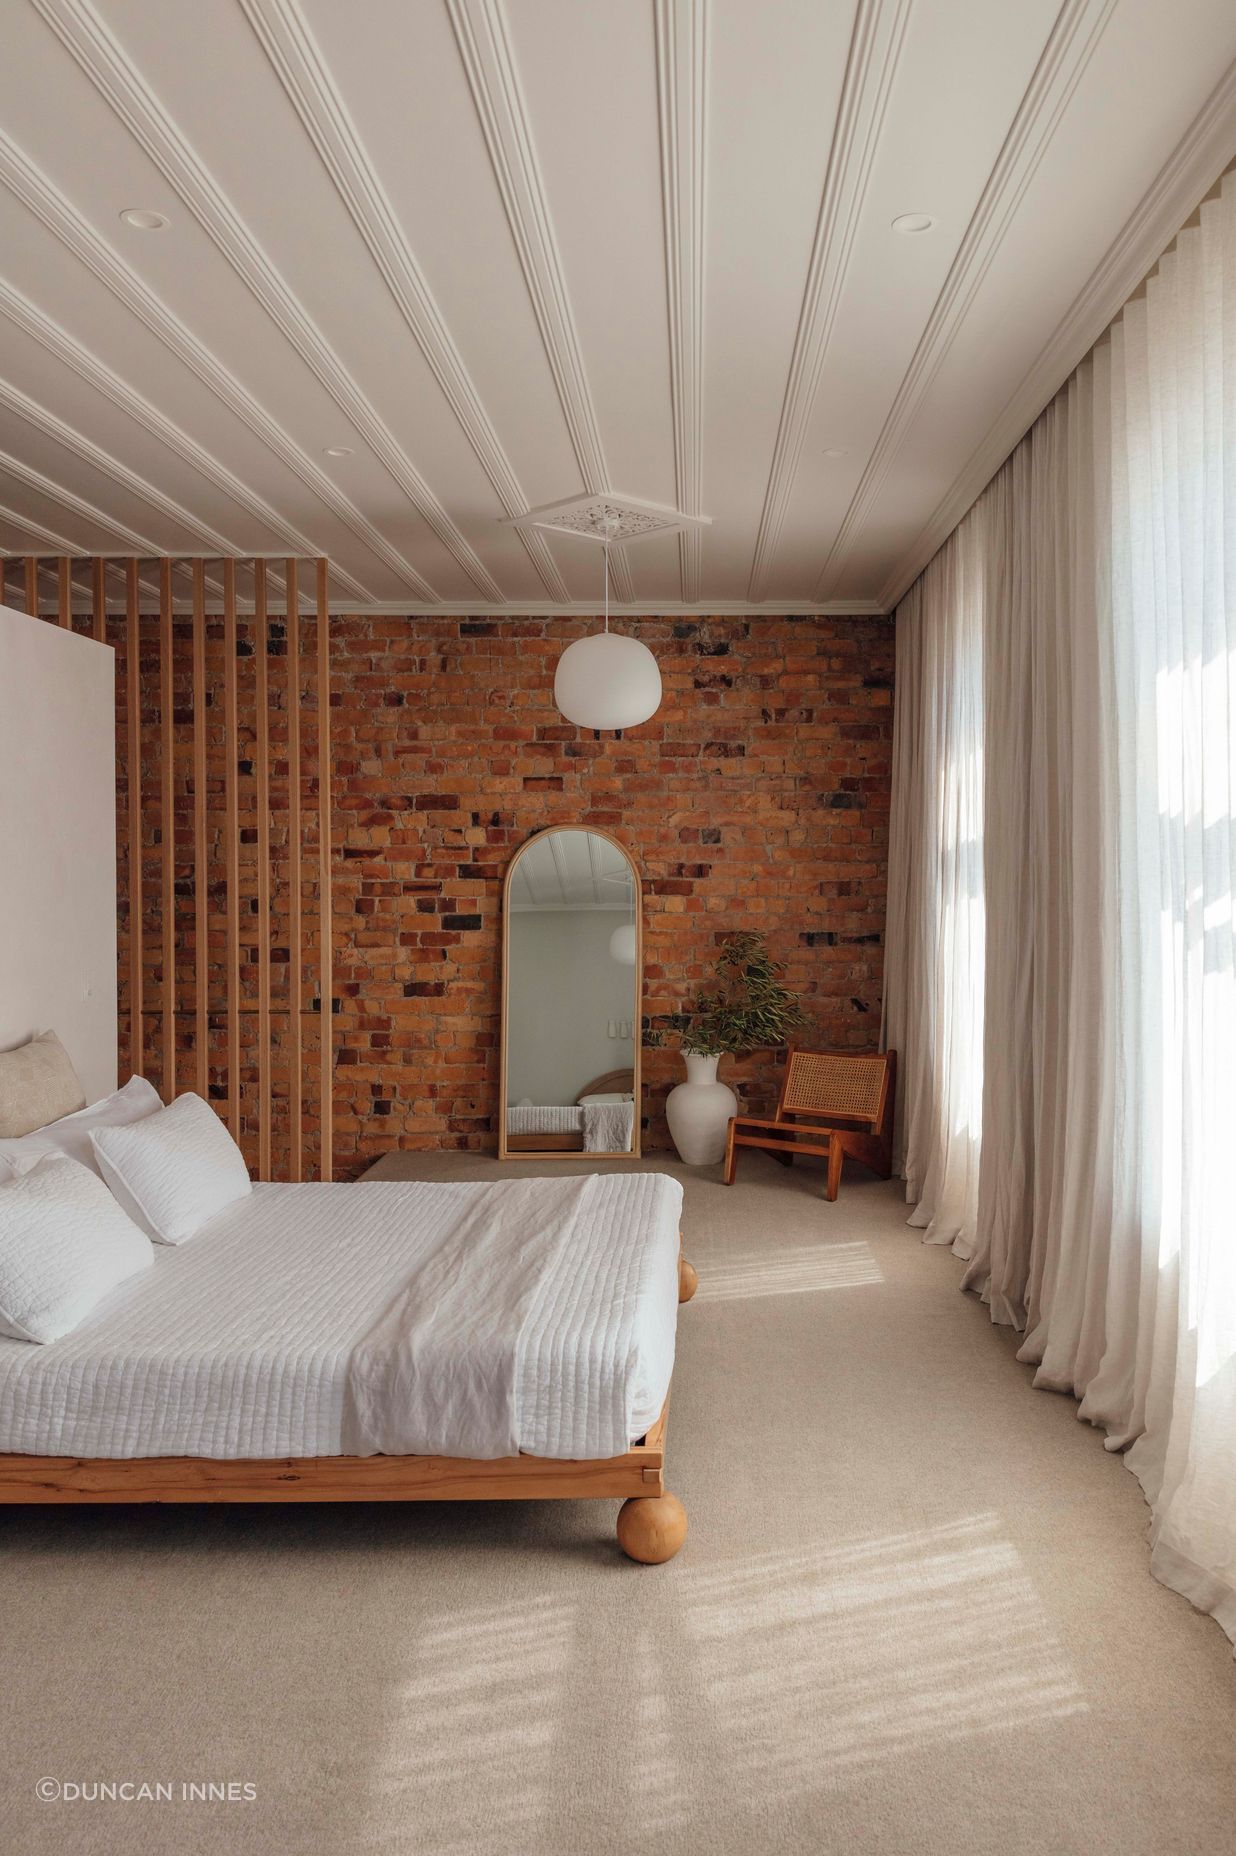 In the bedroom, the original kauri ceiling and brickwork have been restored.